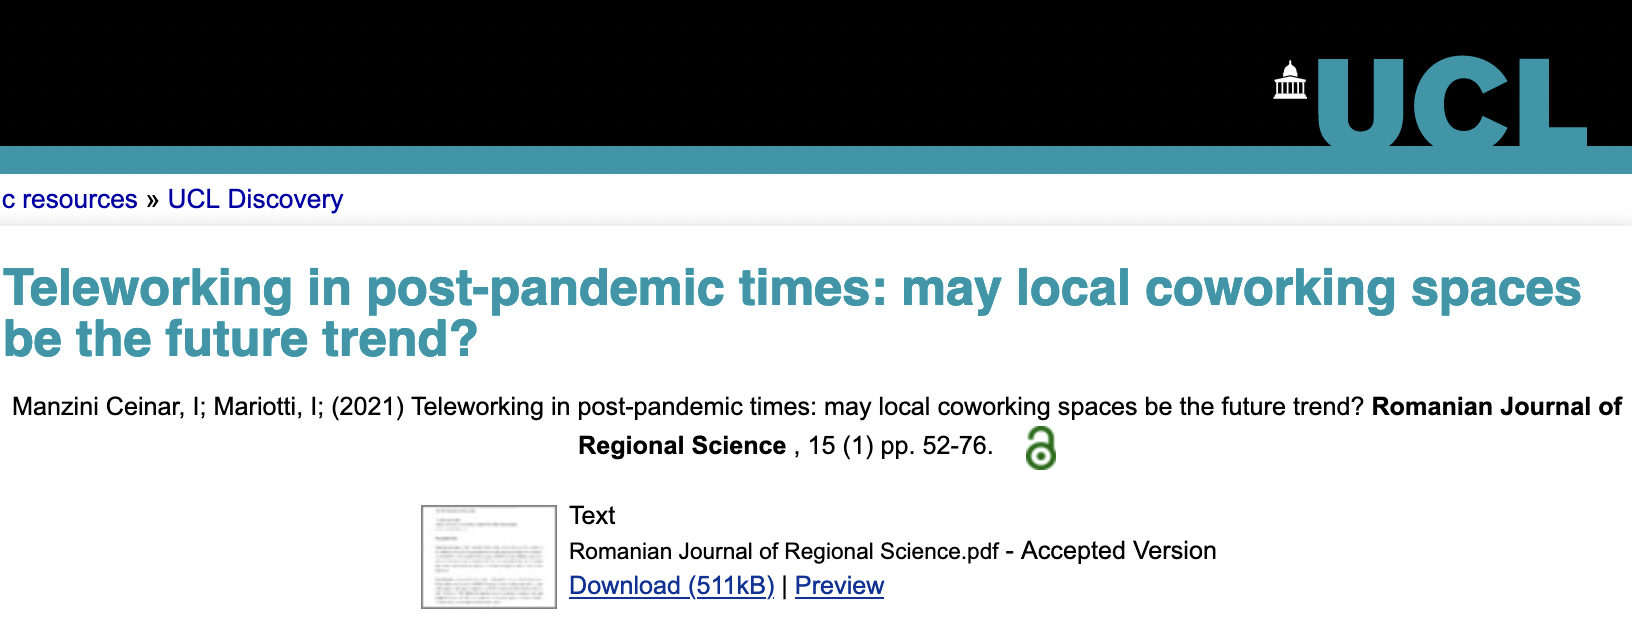 Ricerca | Teleworking in post-pandemic times: may local coworking spaces be the future trend?